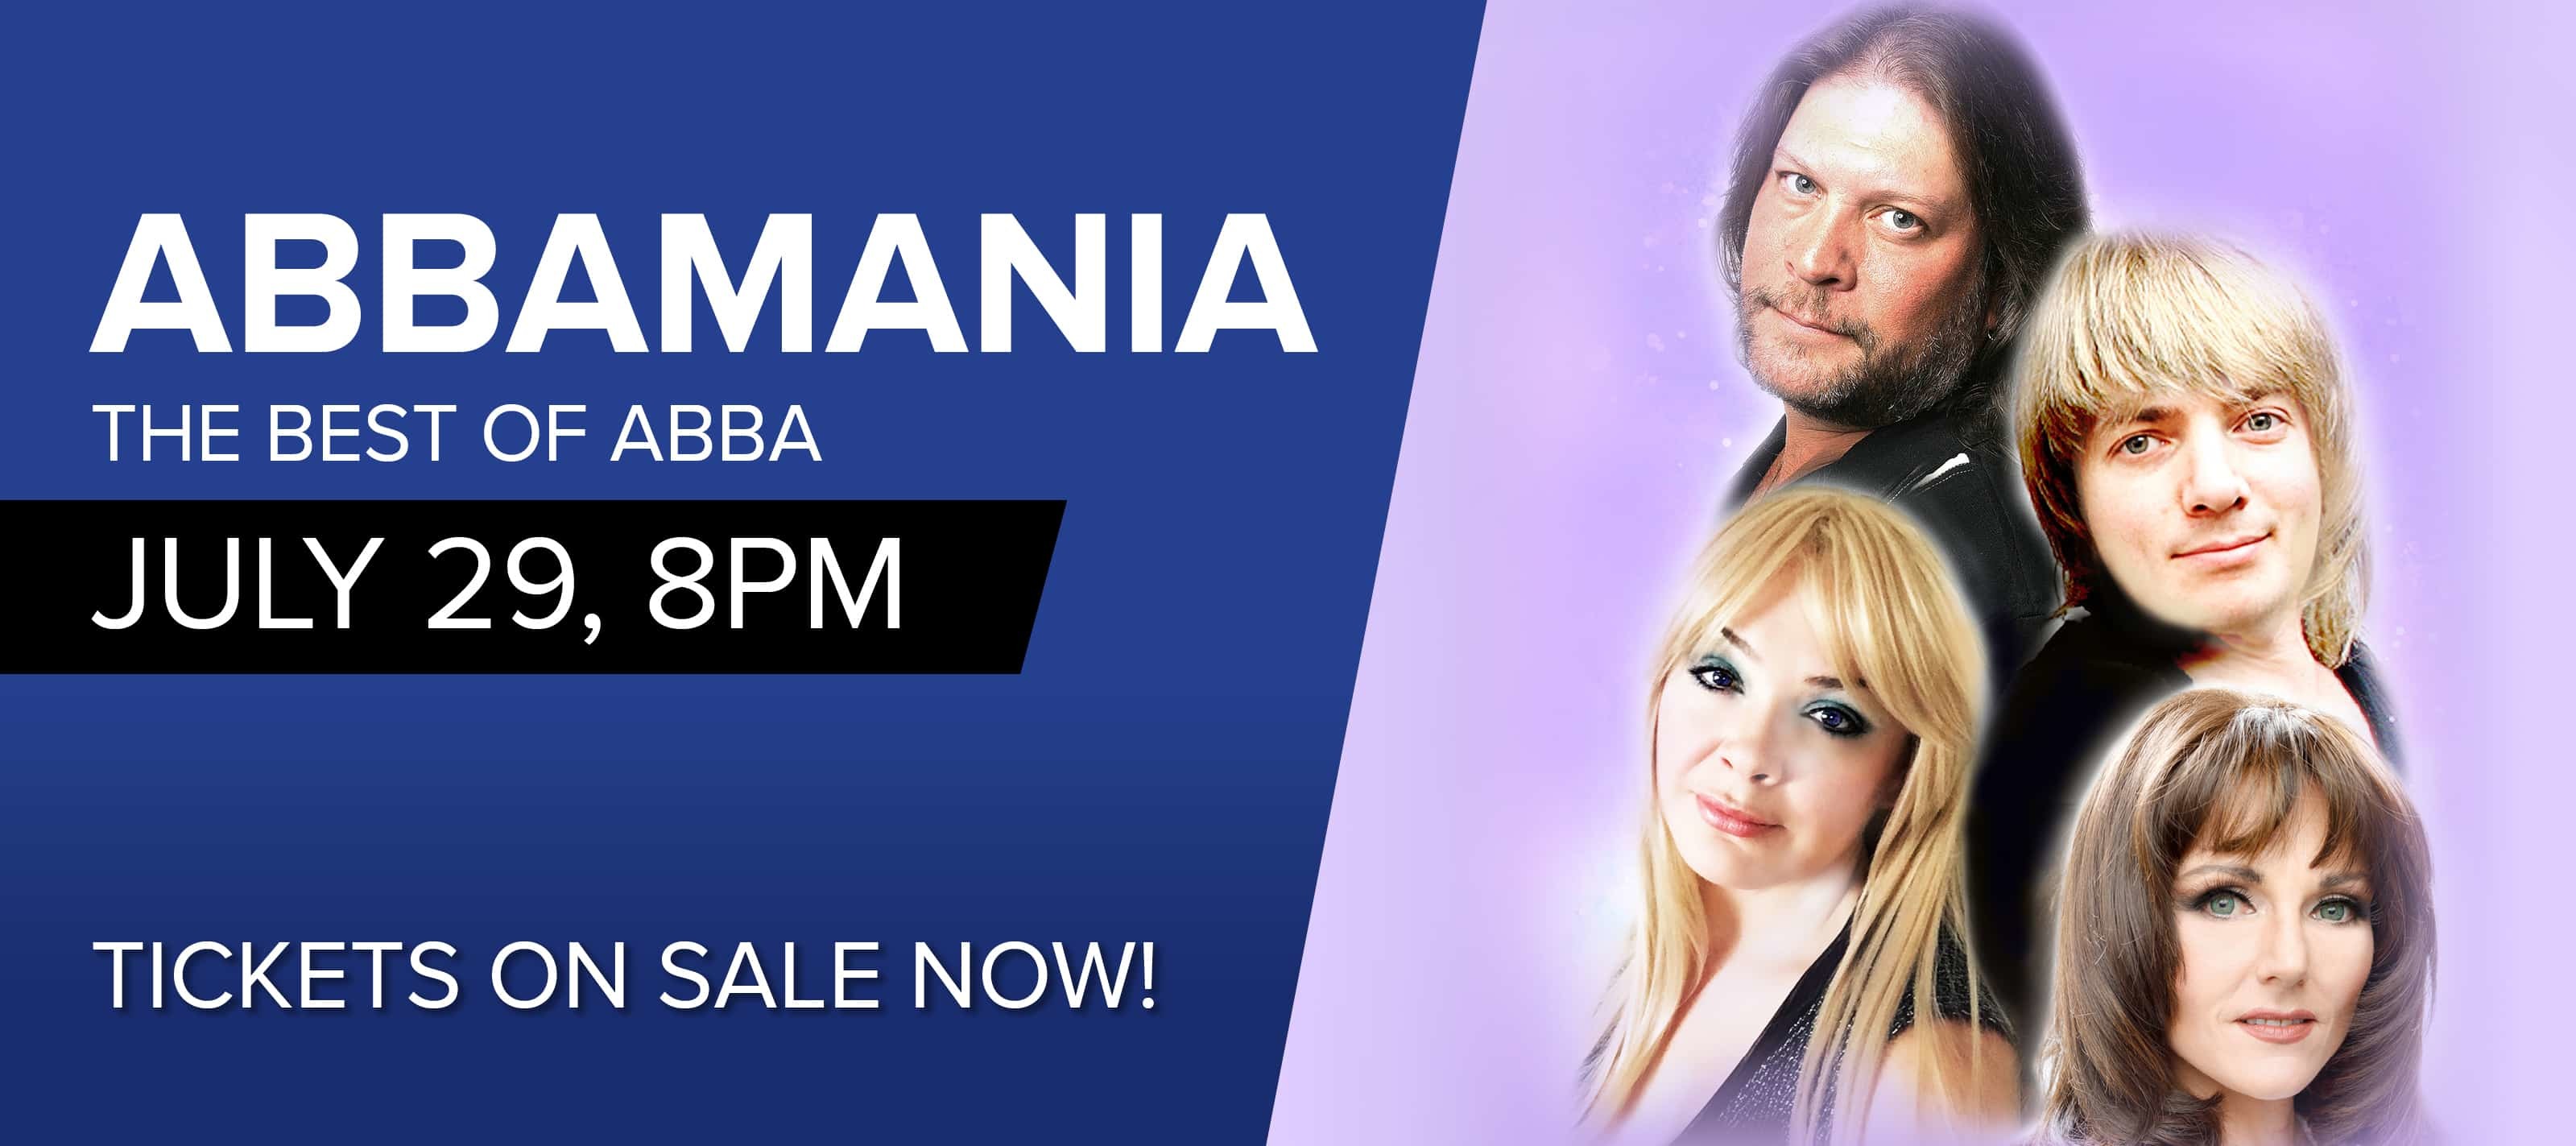 Members of ABBAMANIA pose for a glowing portrait.  Text:  ABBAMANIA The Best of Abba.  July 29 at 8pm. Tickets on sale now!